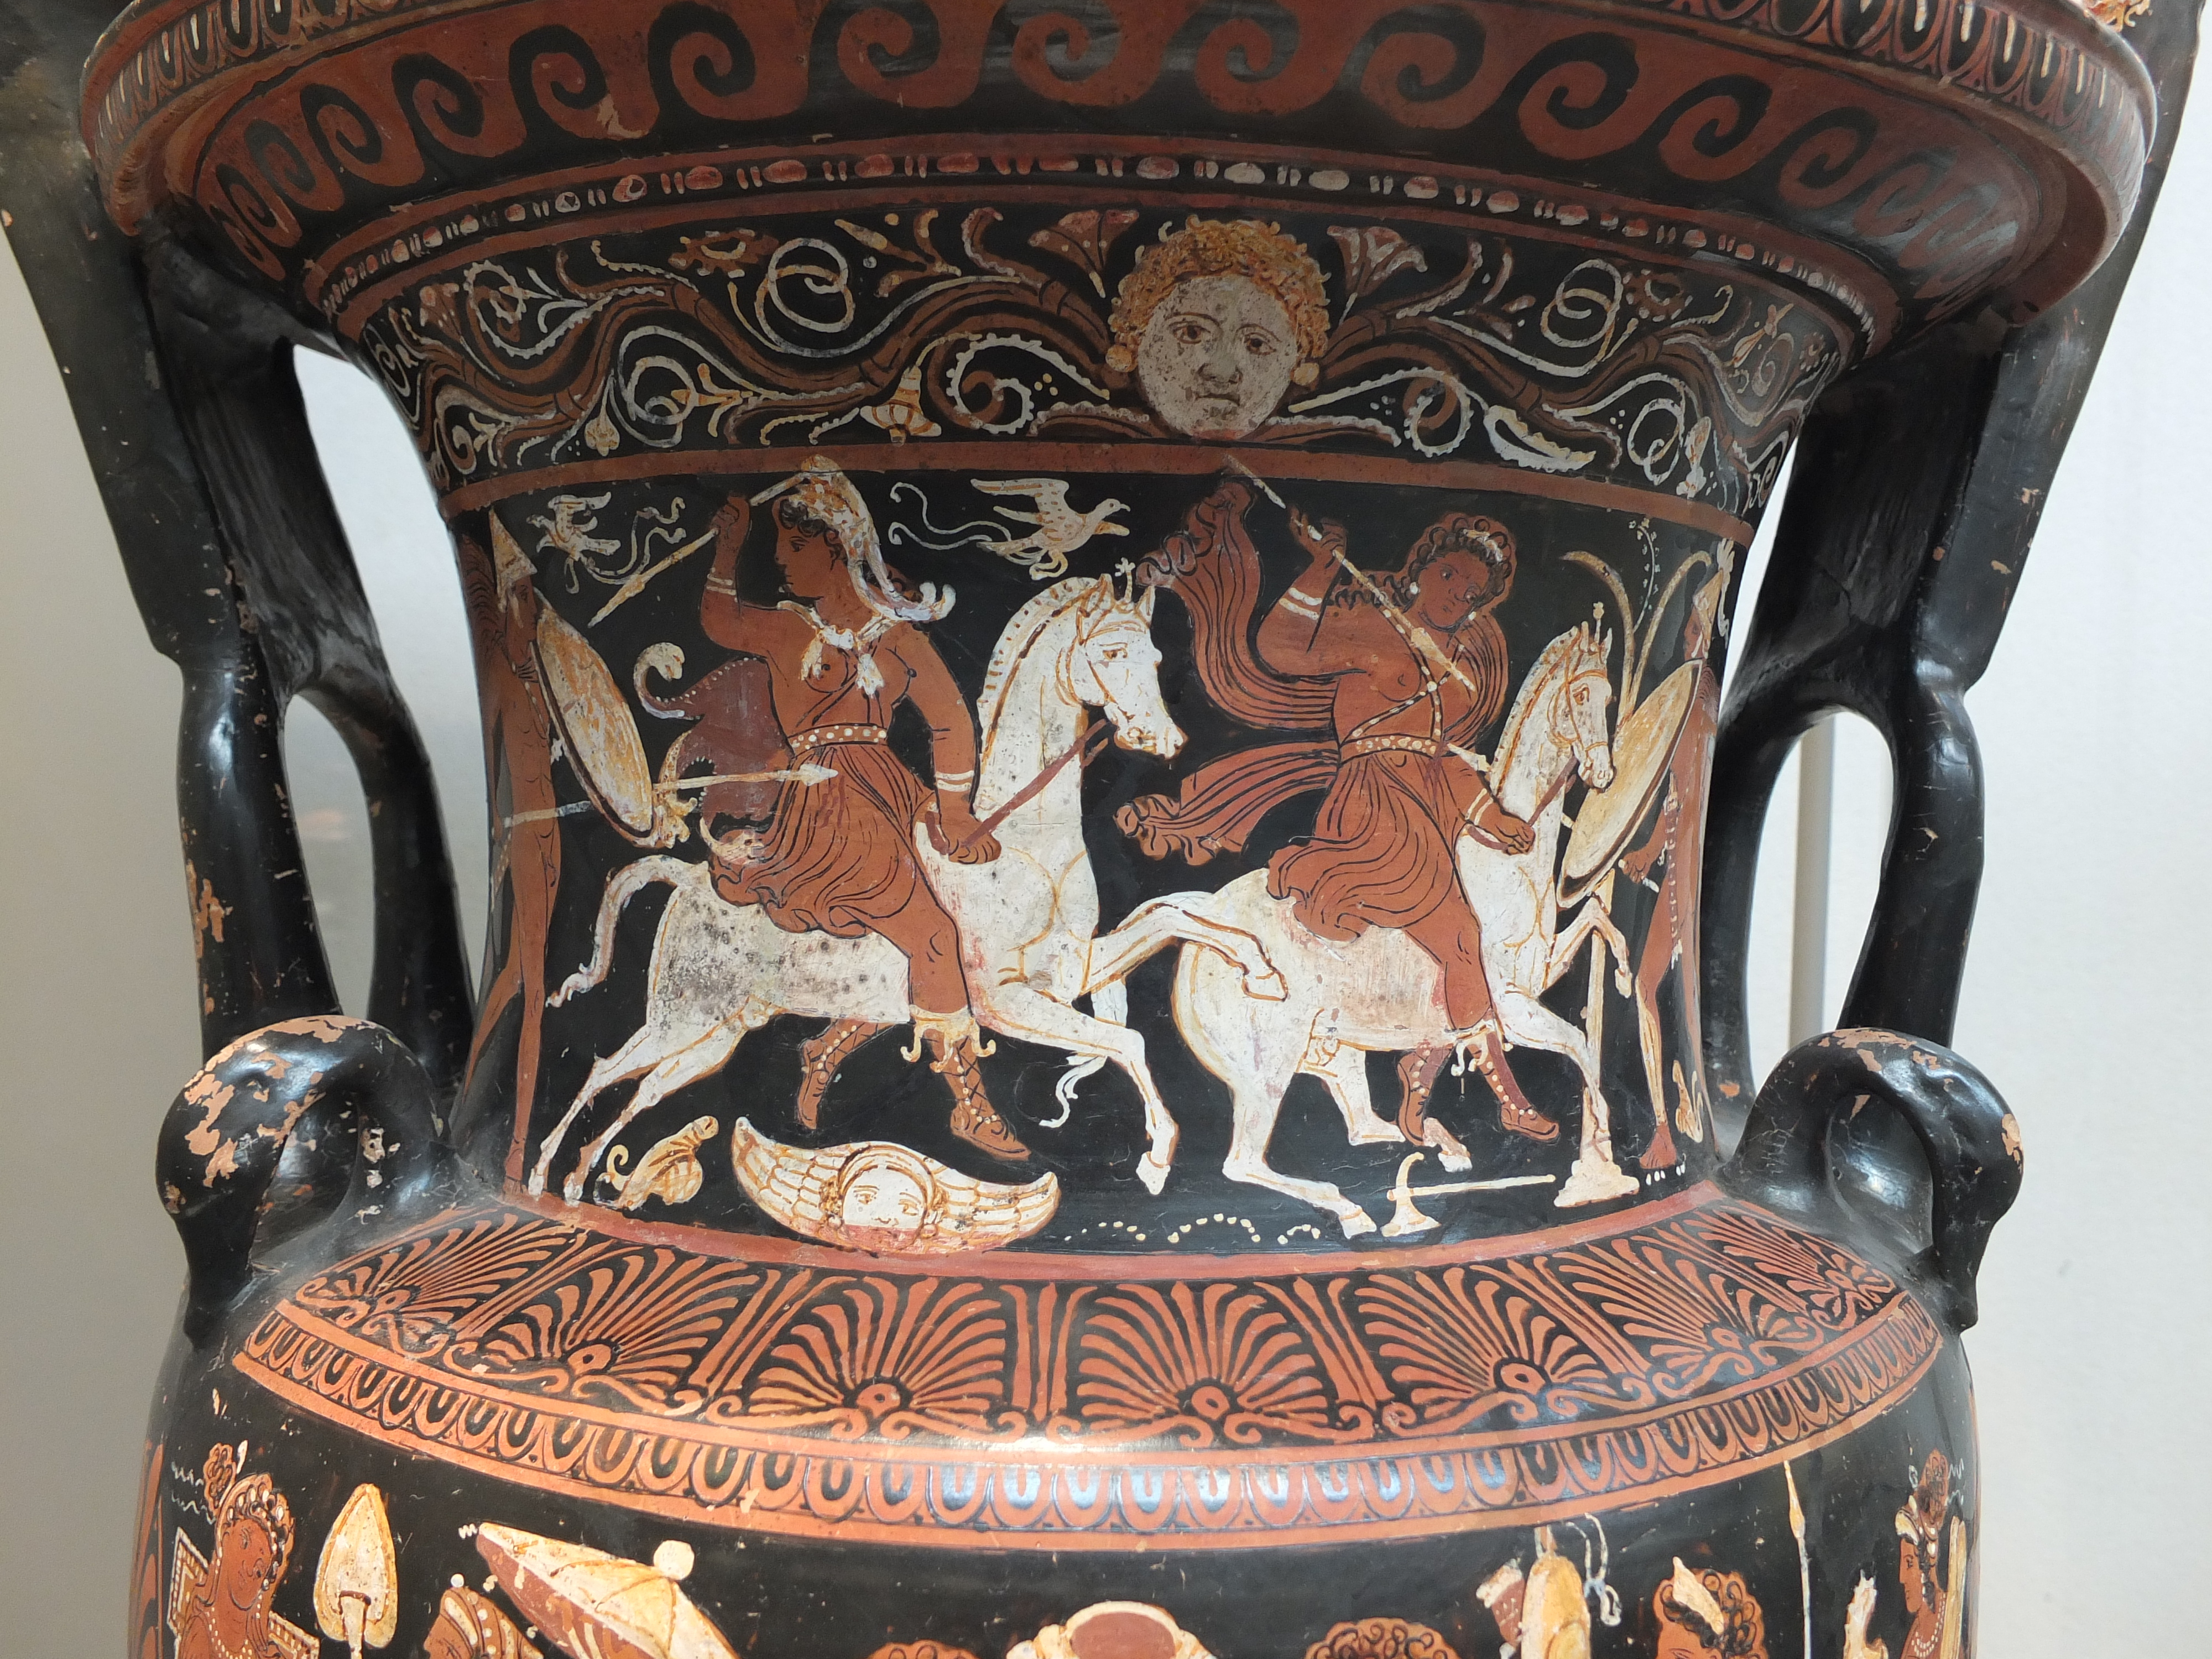 Two Amazons on horses. They have bare chests and wield spears. One wears a hat of wrapped cloth. Birds fly around them. They fight two figures who stand off around the sides of the krater..